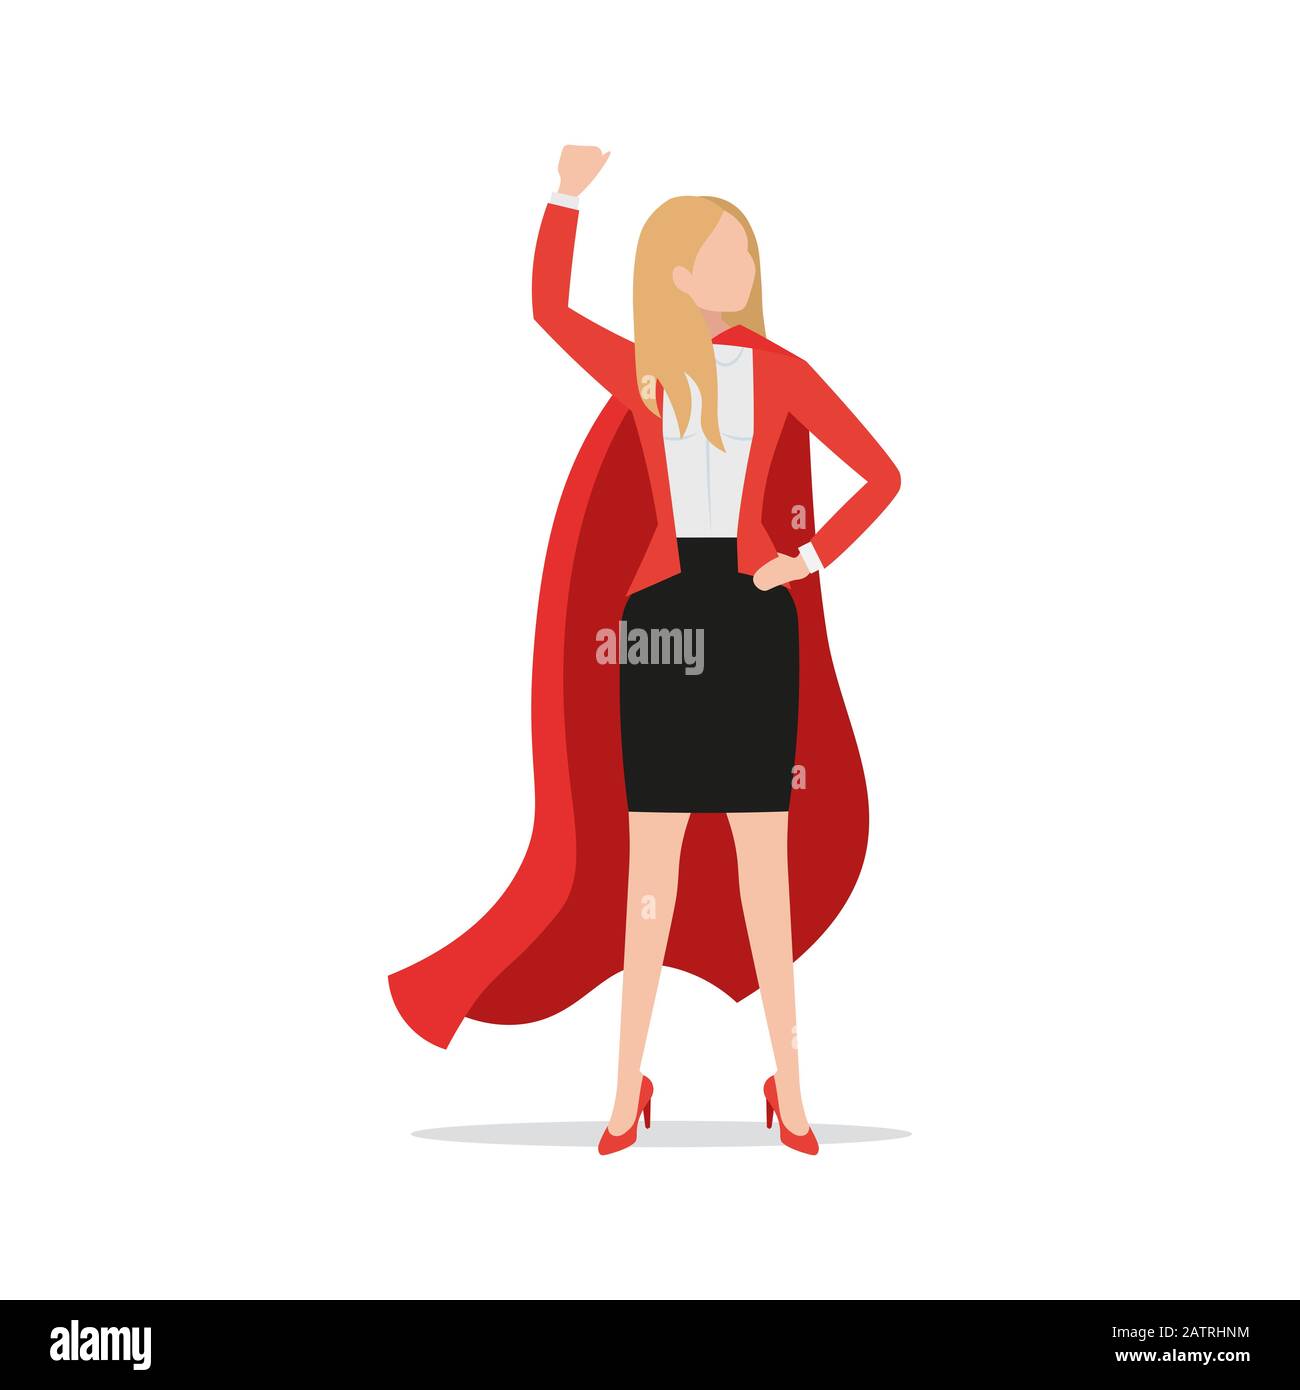 Successful powerful businesswoman wearing red superhero cloak and black skirt, office clothes, flat style icon, vector illustration, female leader Stock Vector